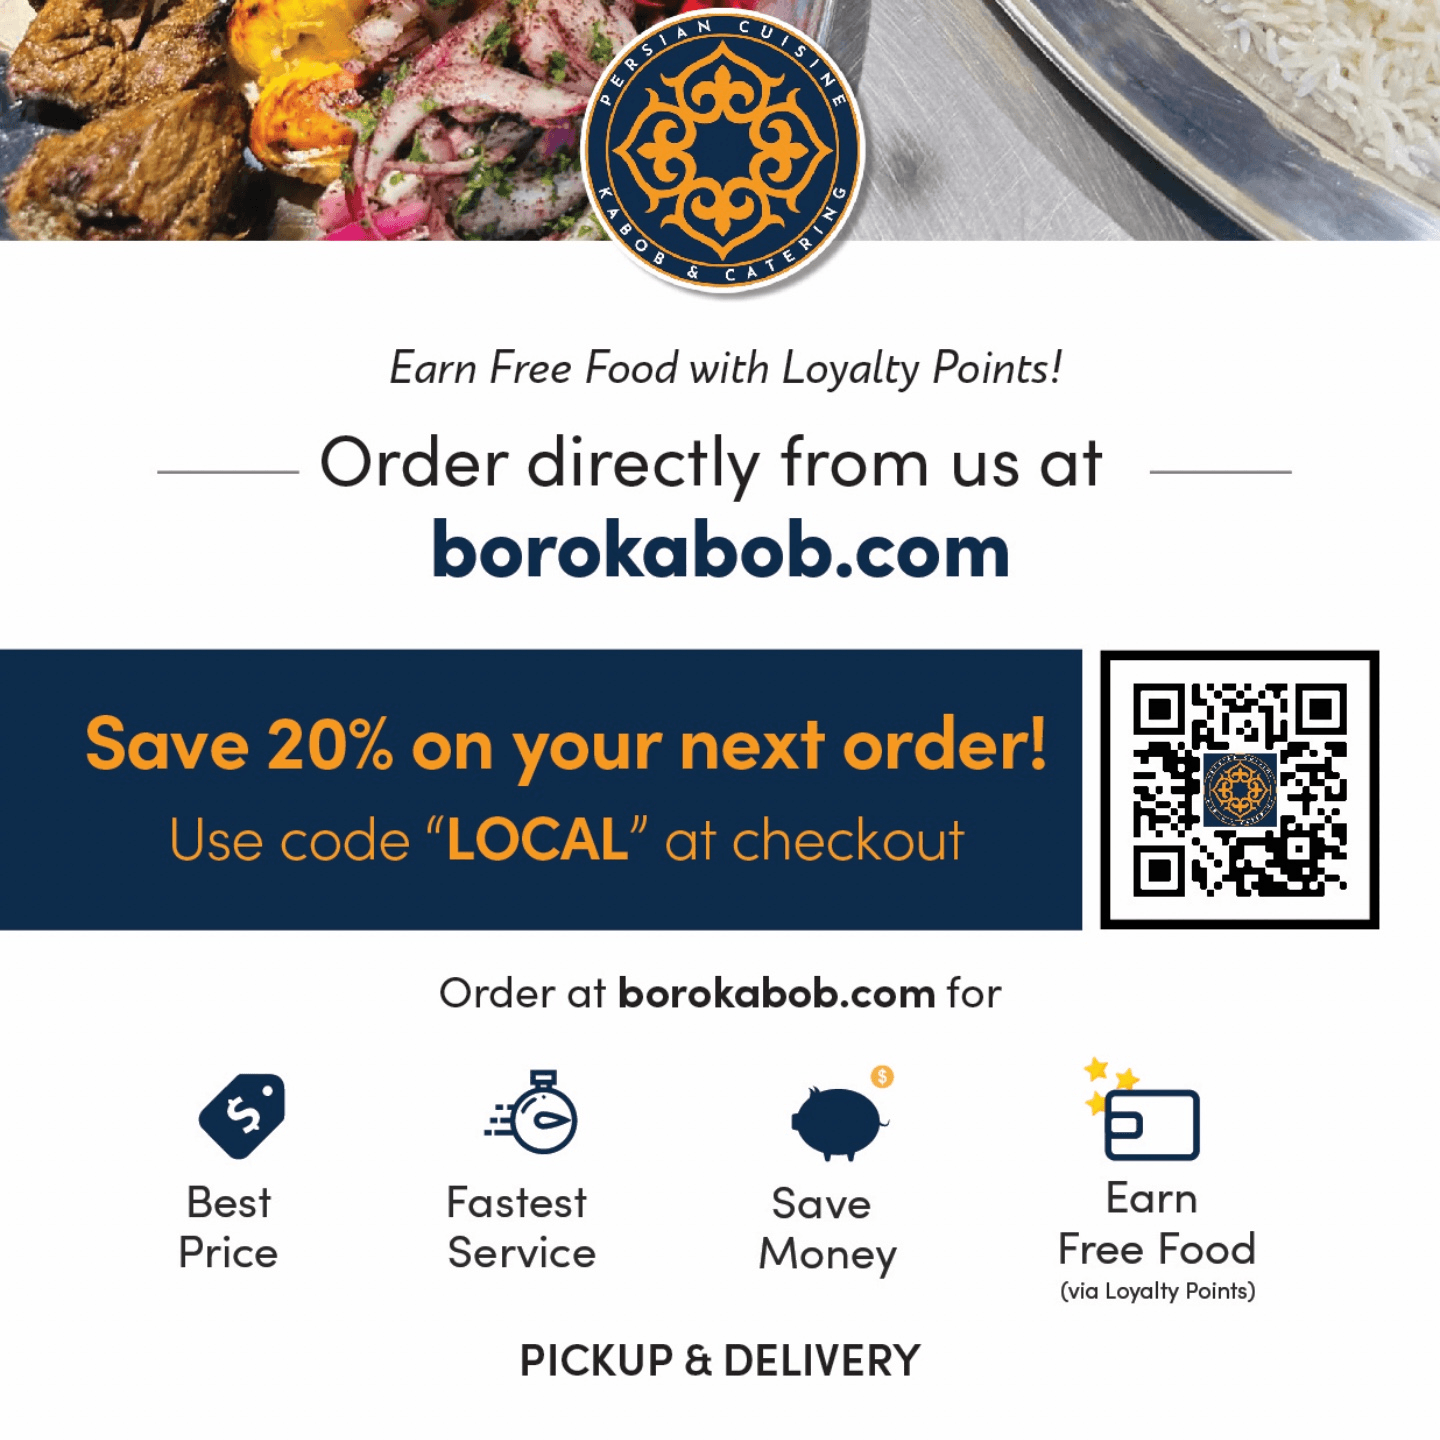 SAVE 20% ON YOUR NEXT ORDER!